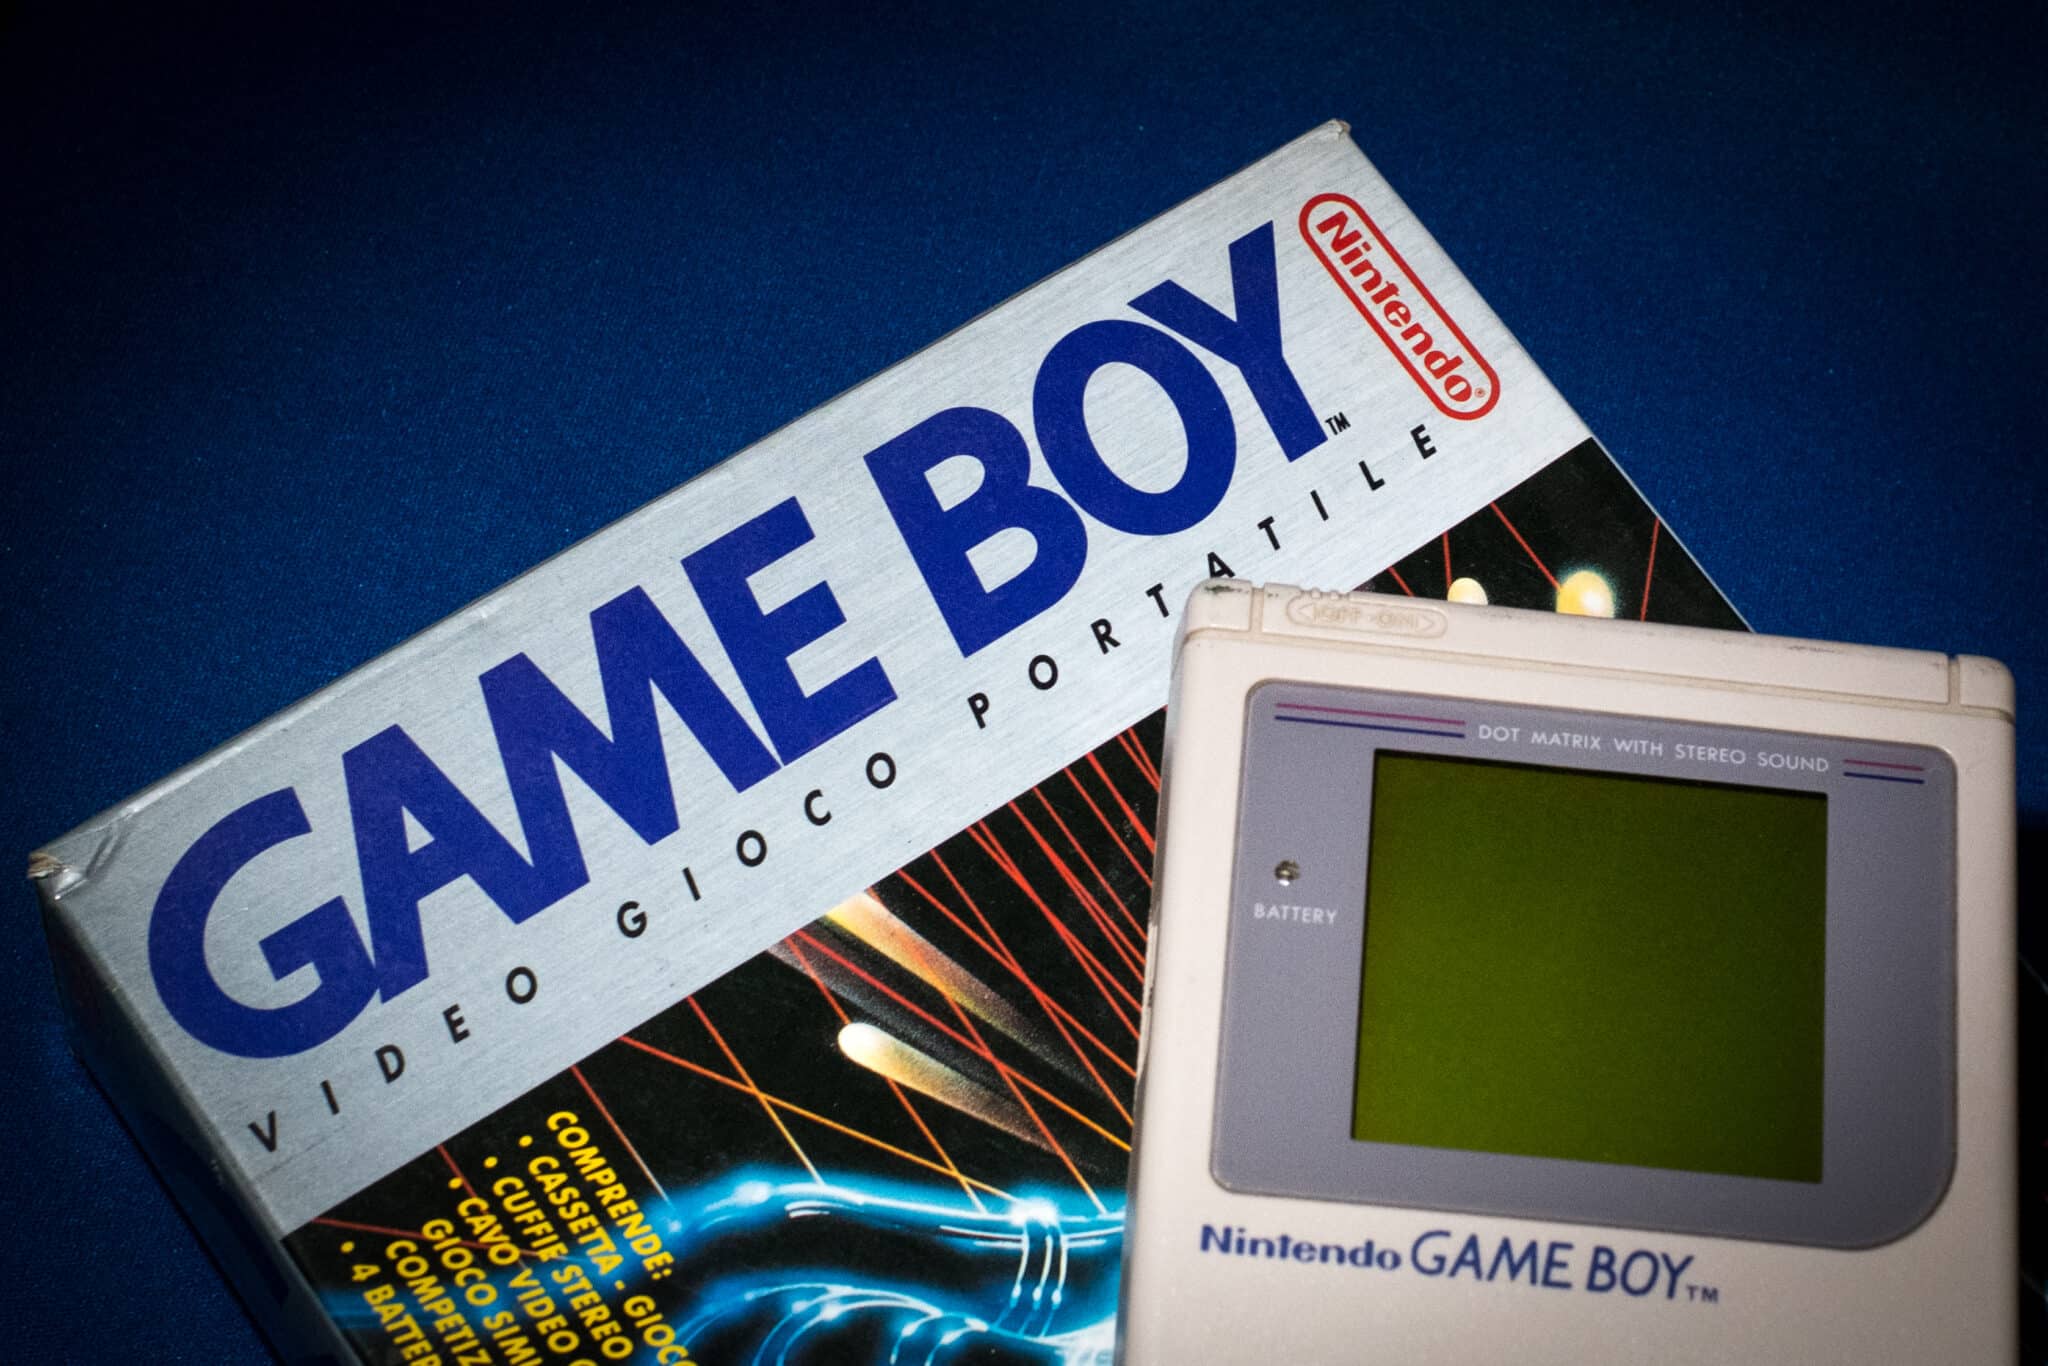 A vintage game console, by the Nintendo Game Boy handheld system, when it was released in Japan in 1989. 